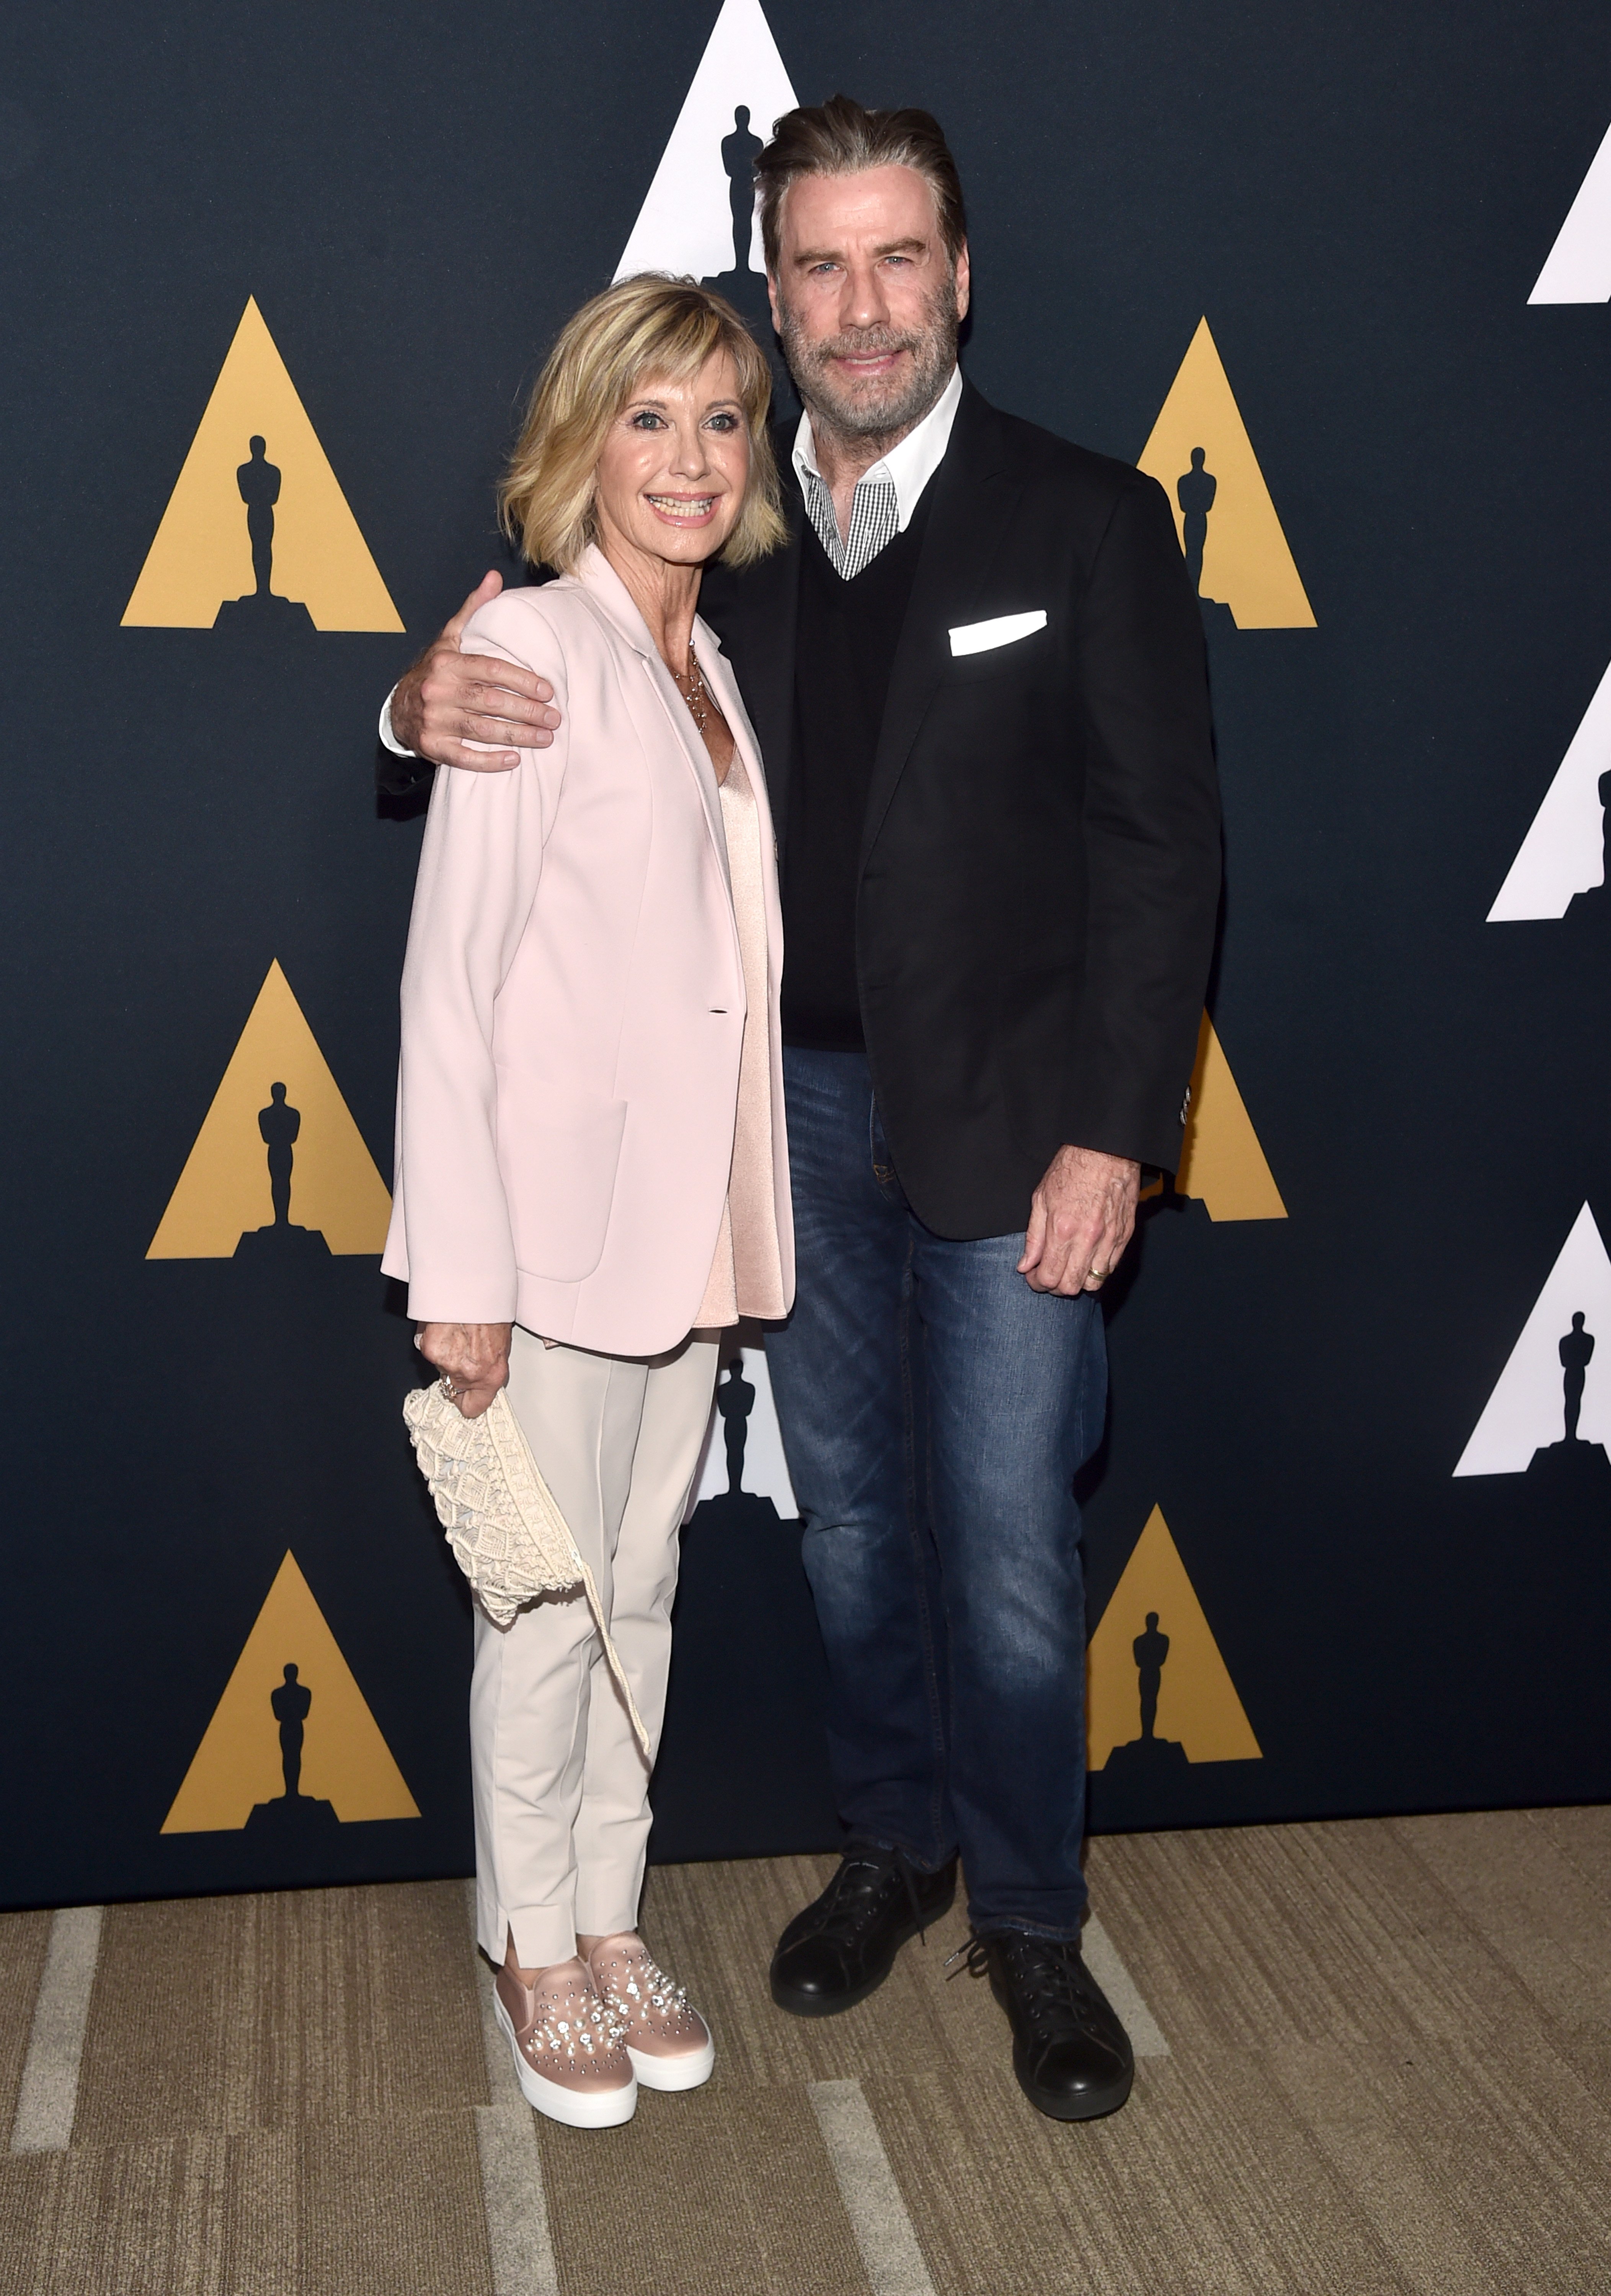 Olivia Newton-John and John Travolta attend the "Grease" 40th anniversary screening in Beverly Hills, California. on August 15, 2018. | Source: Getty Images.